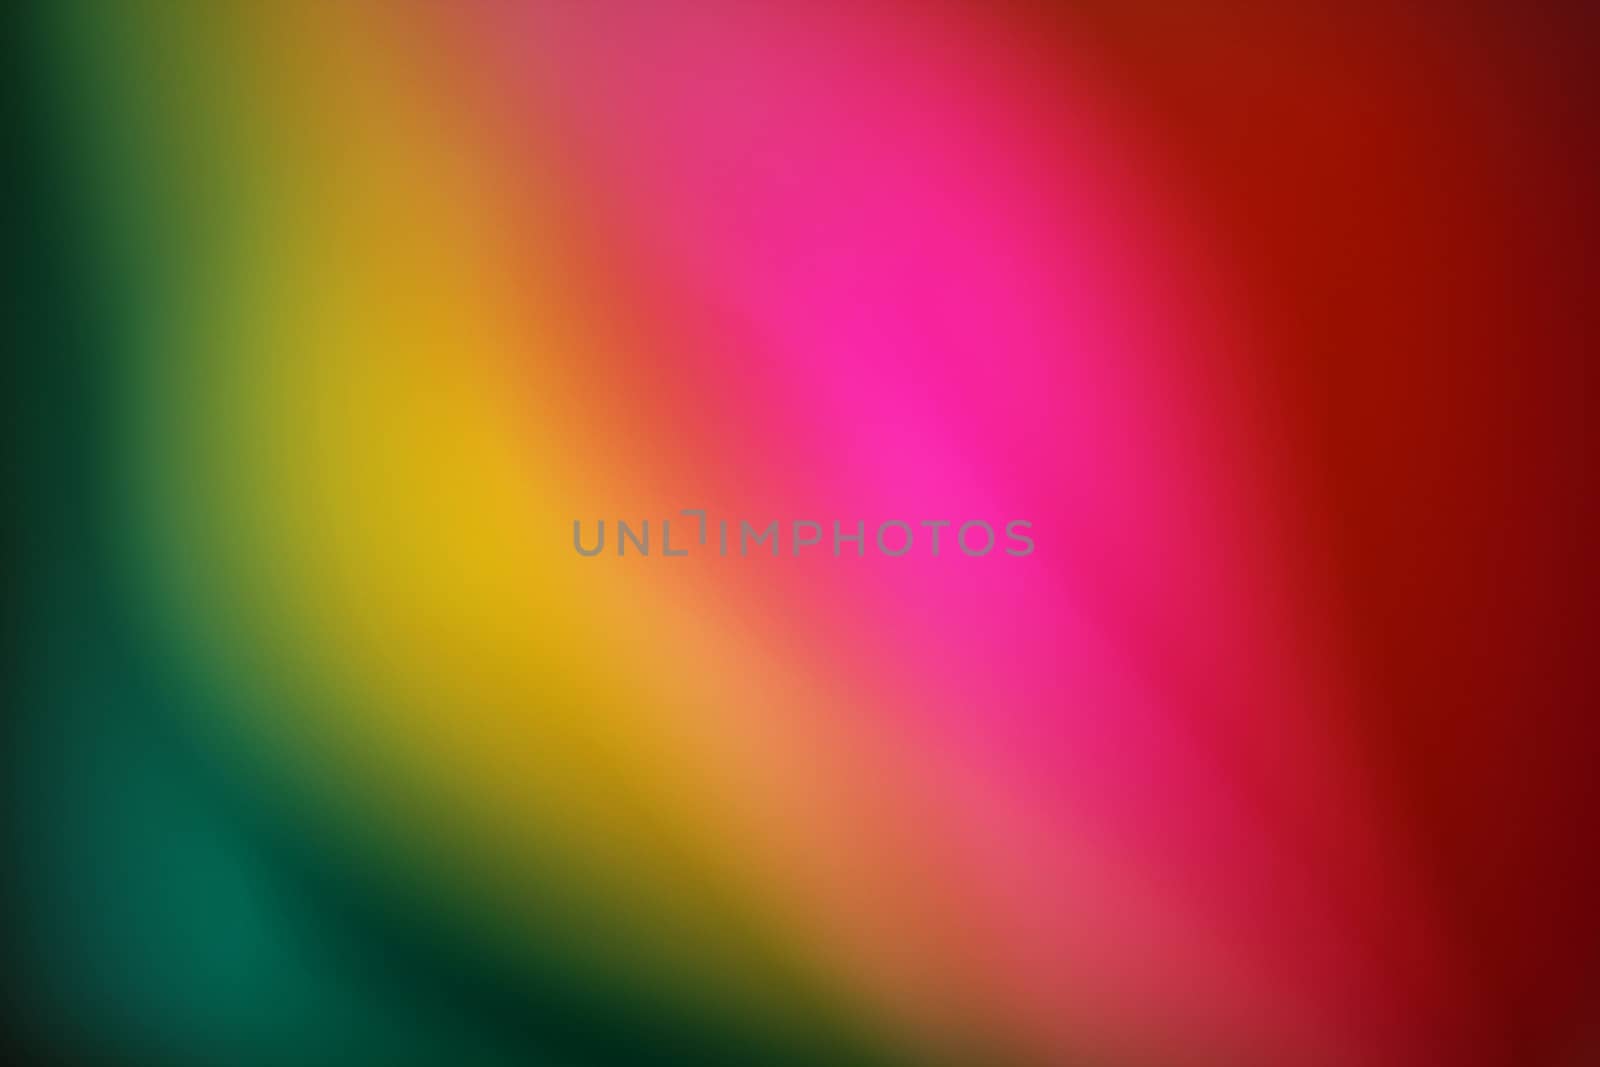 Abstract paper stack defocused colourful background. Paper stack of different colors defocused